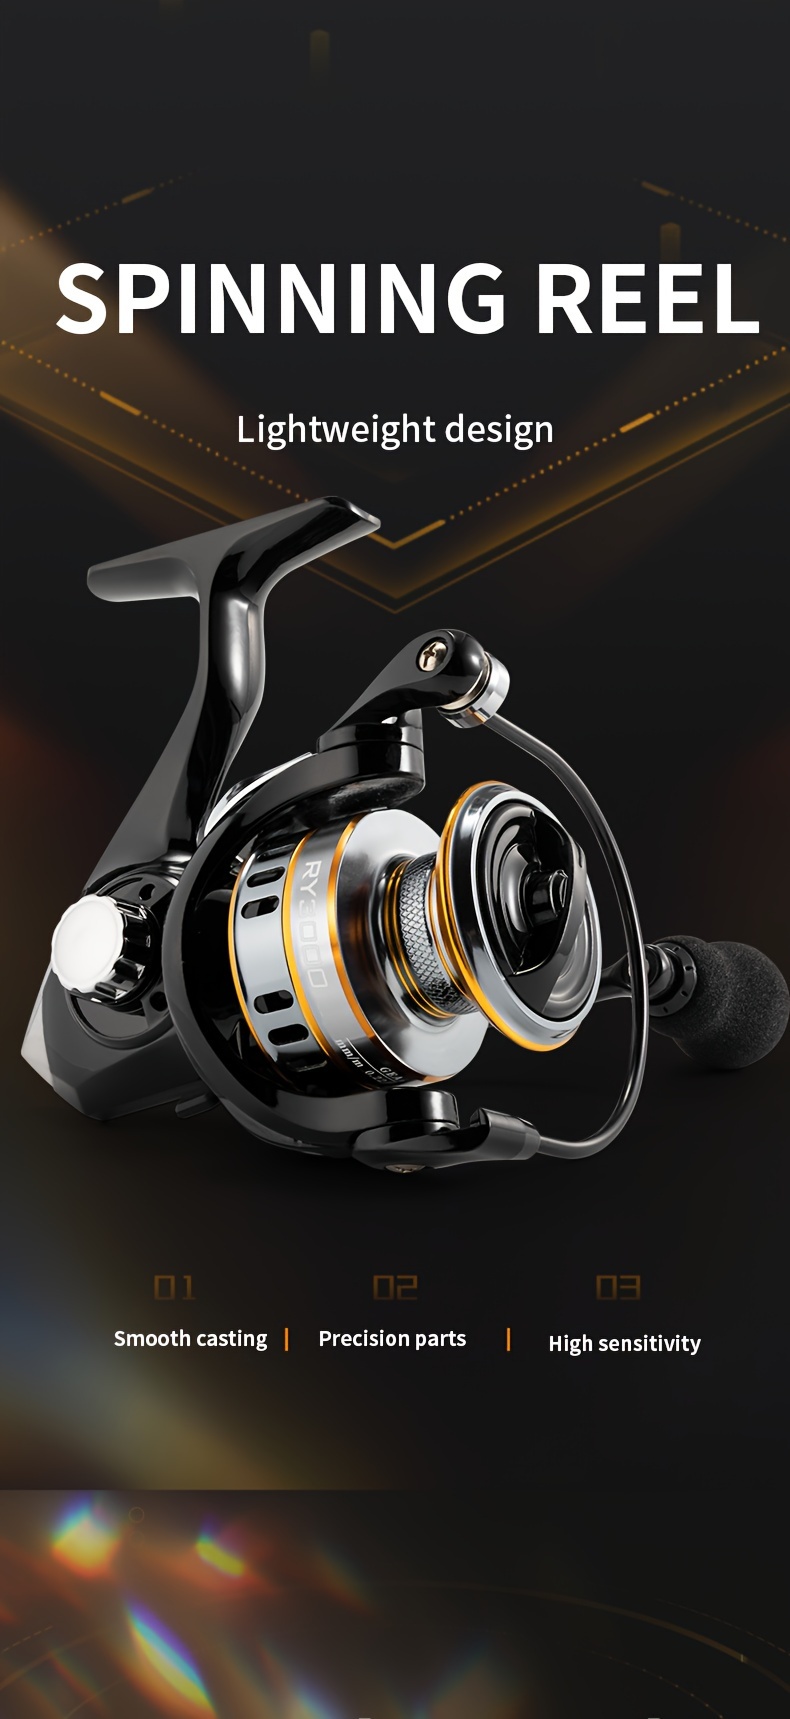 .com: N/A Spinning Fishing Reel 2000-7000 Ultralight Max Drag 15kg  5.2:1 Surfcasting Spinning Reel Saltwater Jigging Reels (Size : 6000  Series) : Sports & Outdoors